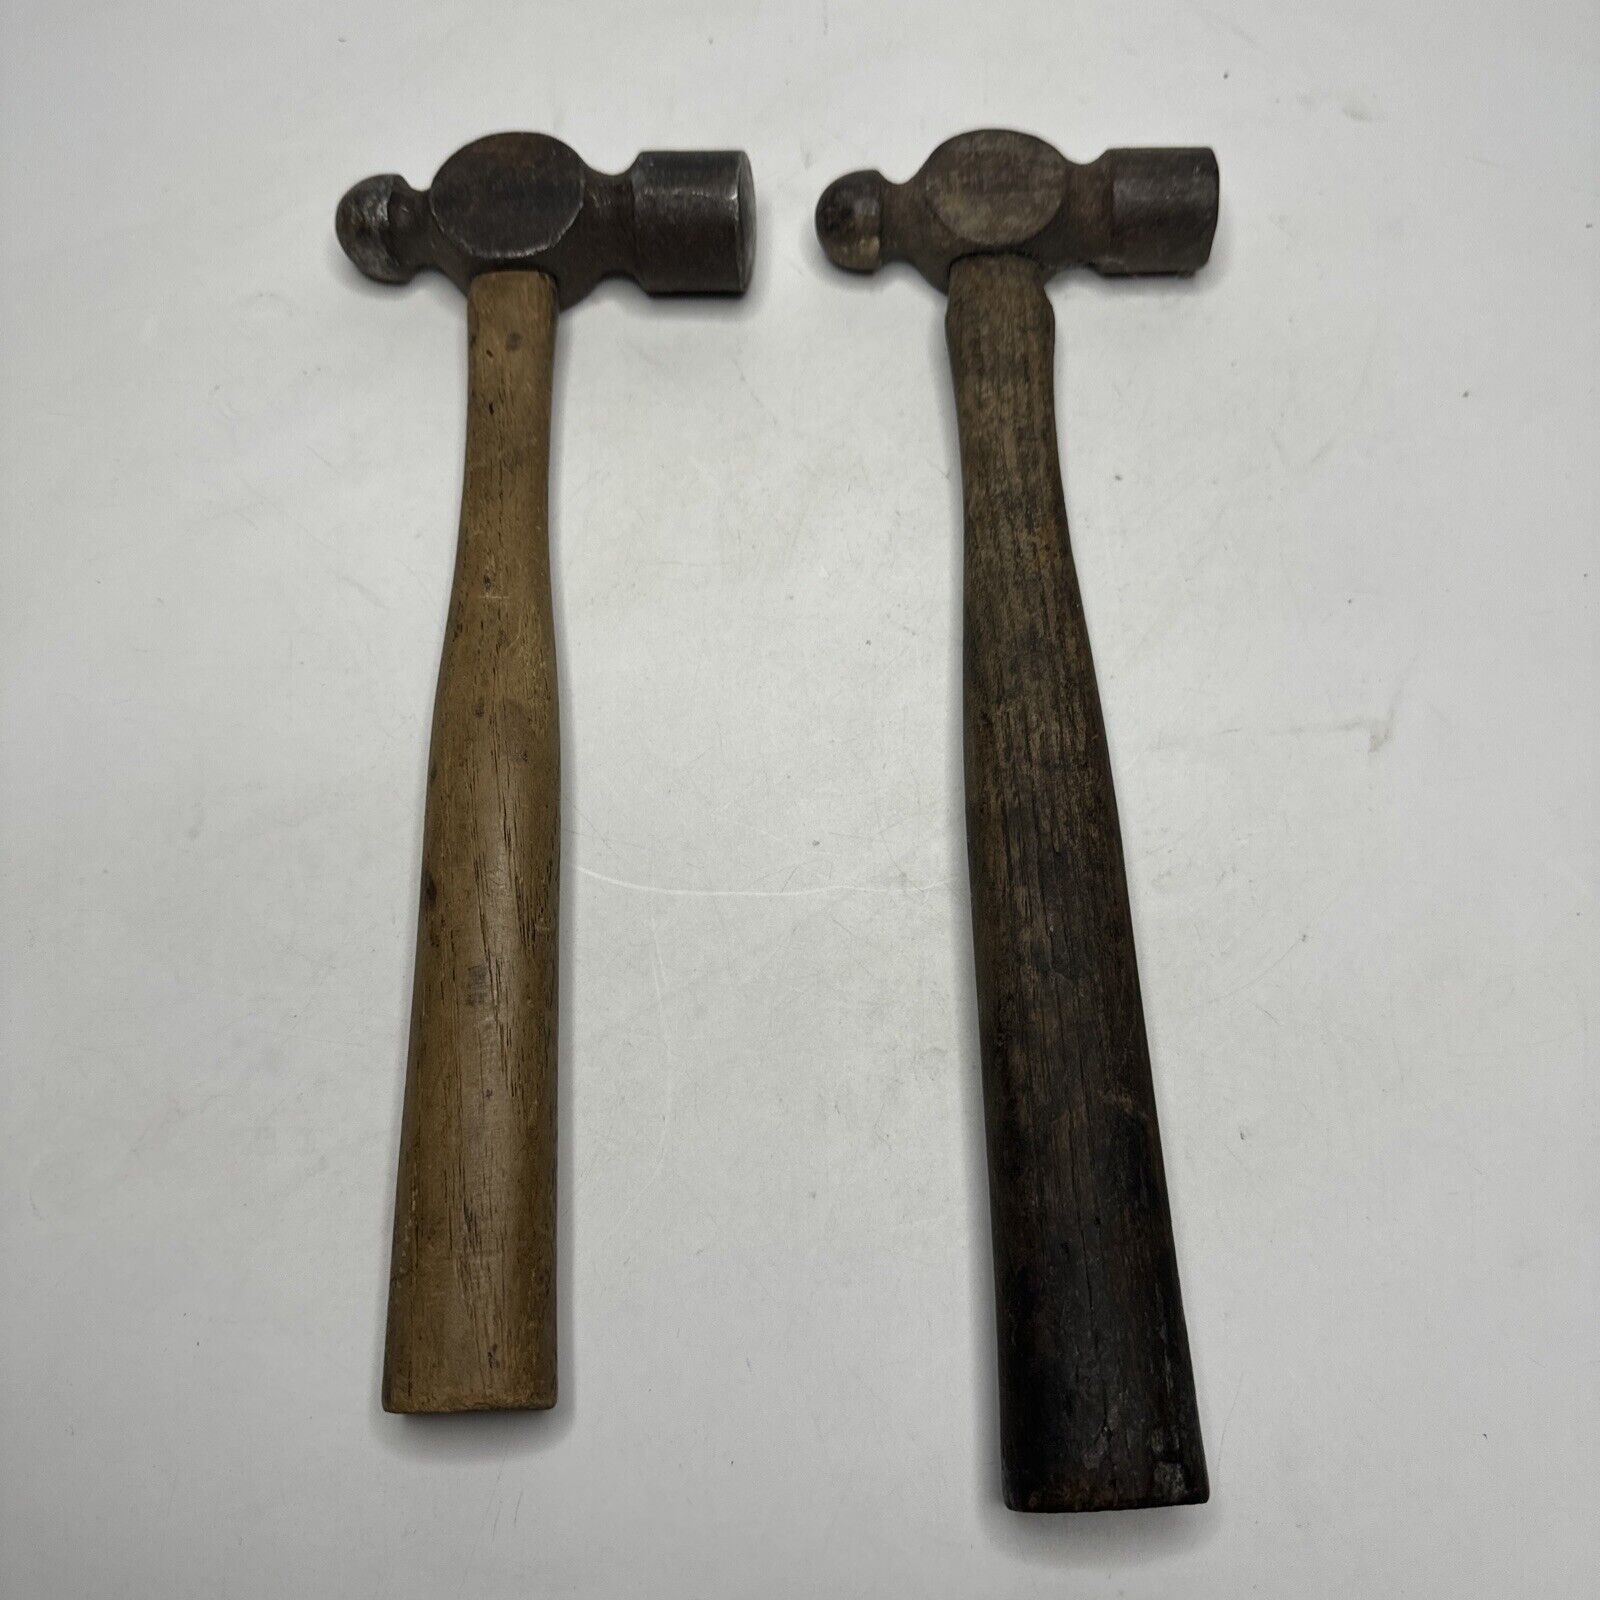 TWO VINTAGE BALL PEIN HAMMERS